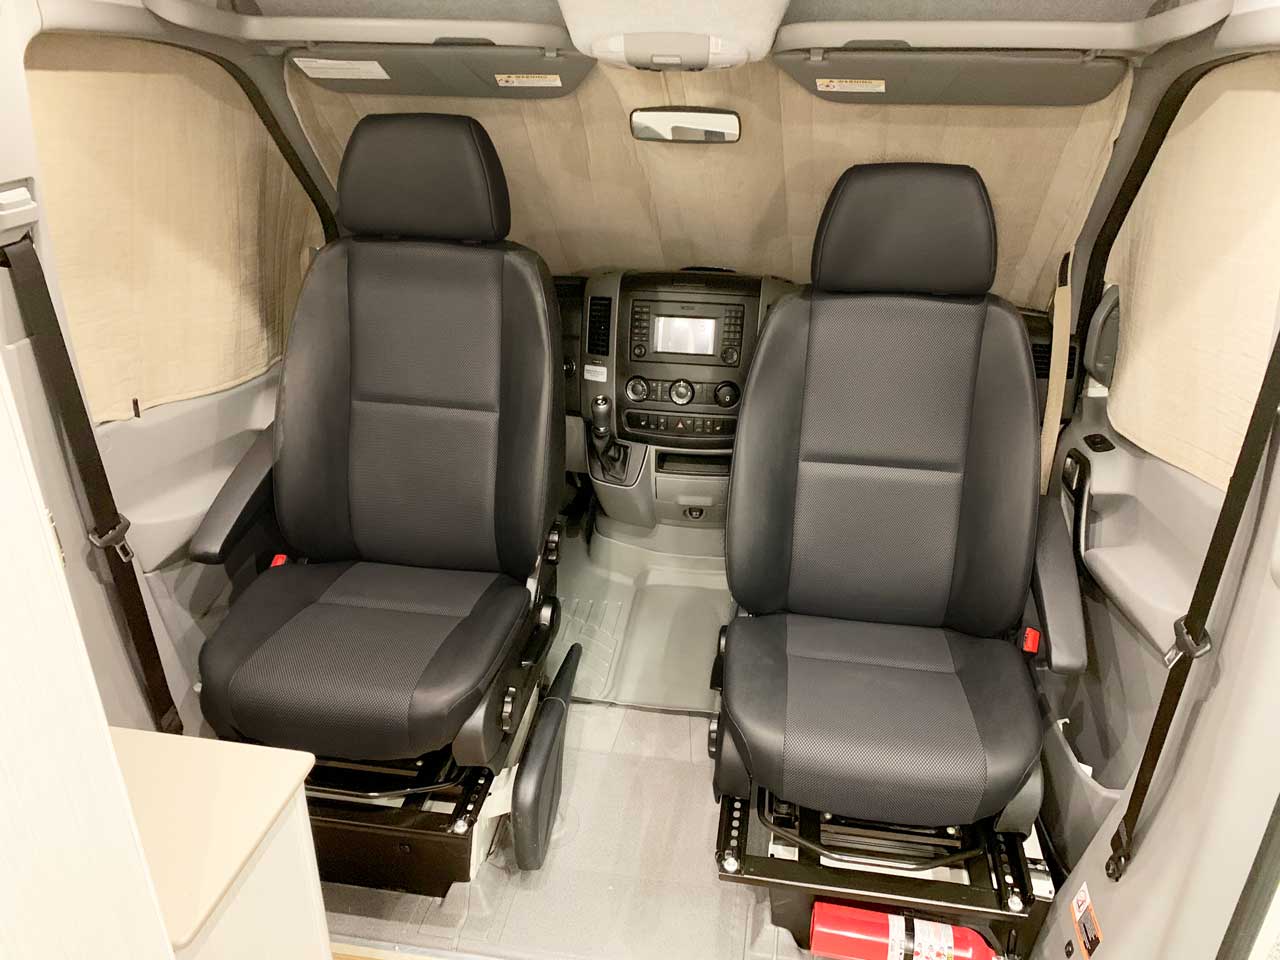 Front seats swivel for facing the interior of the van.